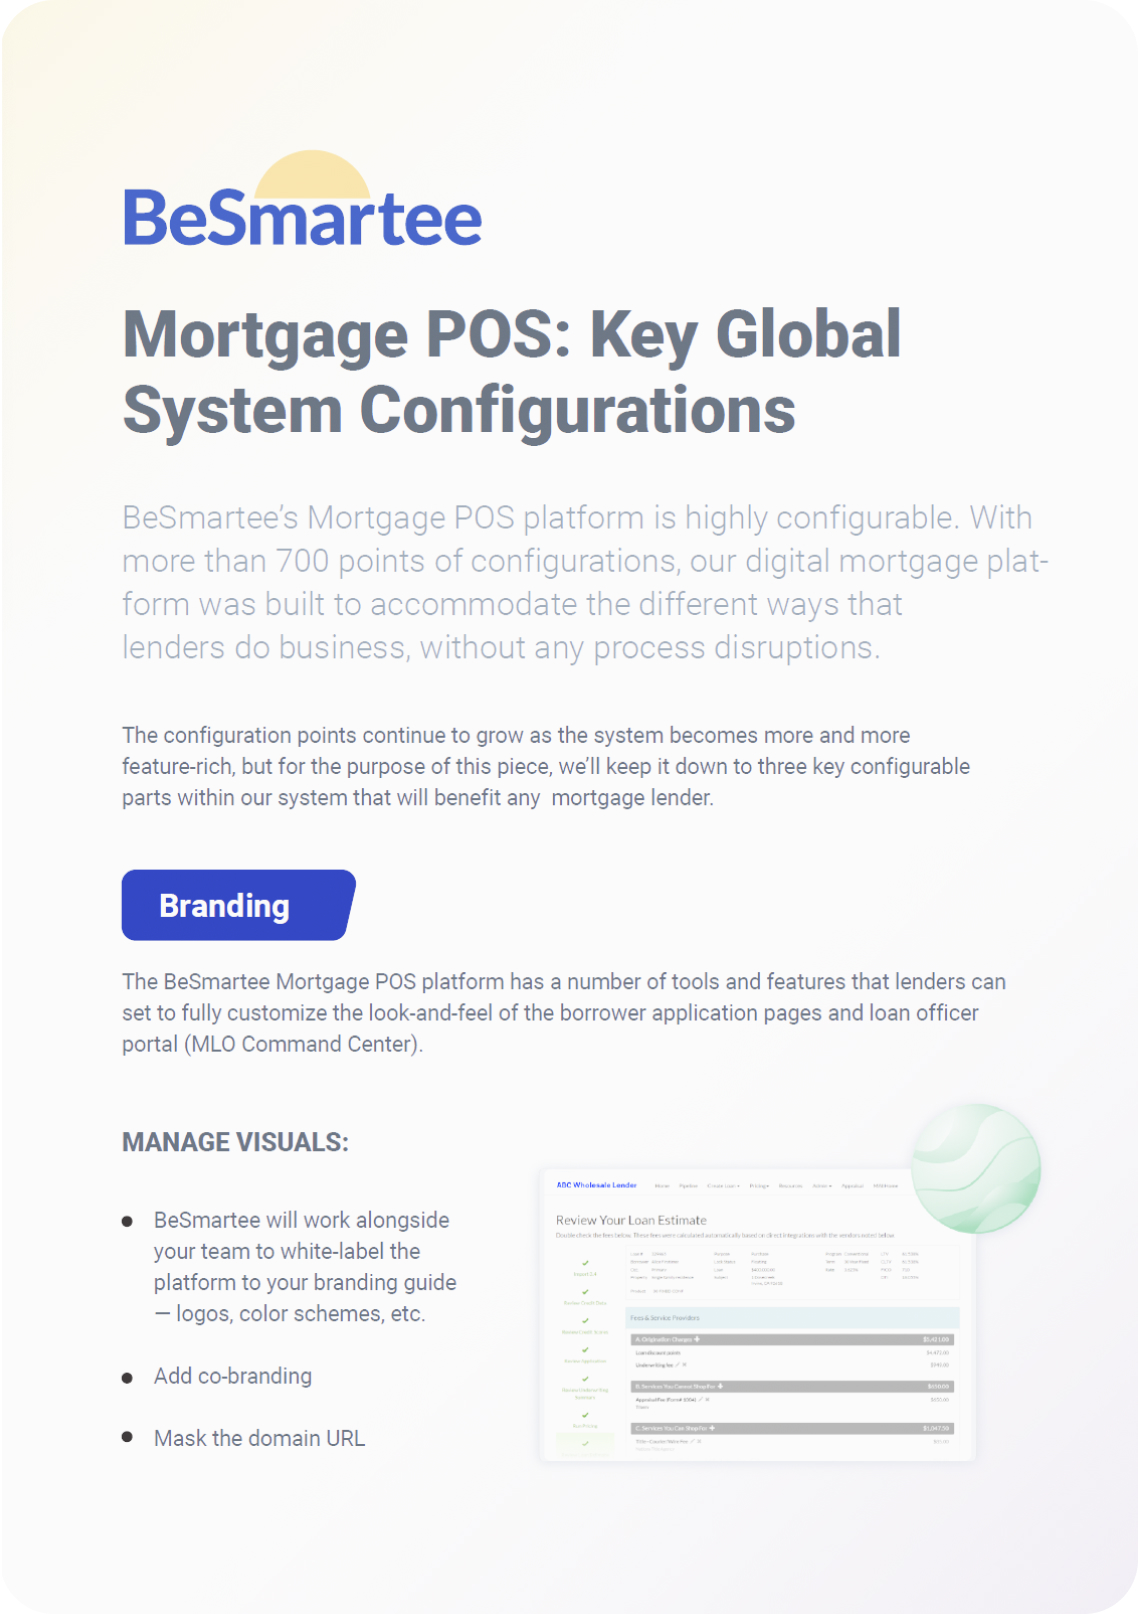 Mortgage POS: Key Global System Configurations